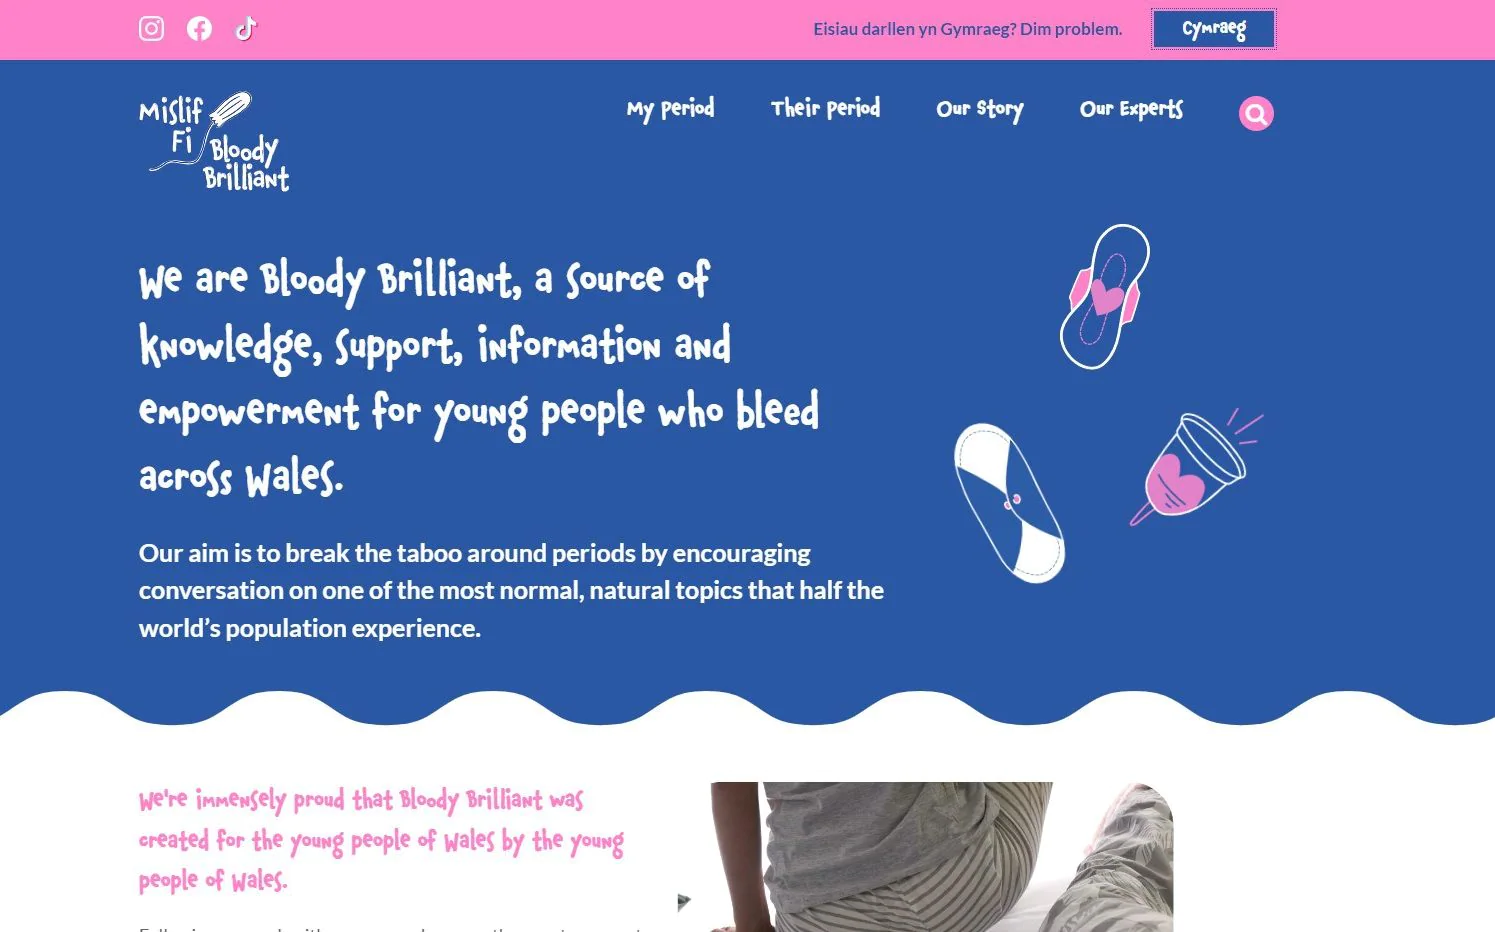 Welsh NHS changes "girls" to "young people who bleed" on menstruation website